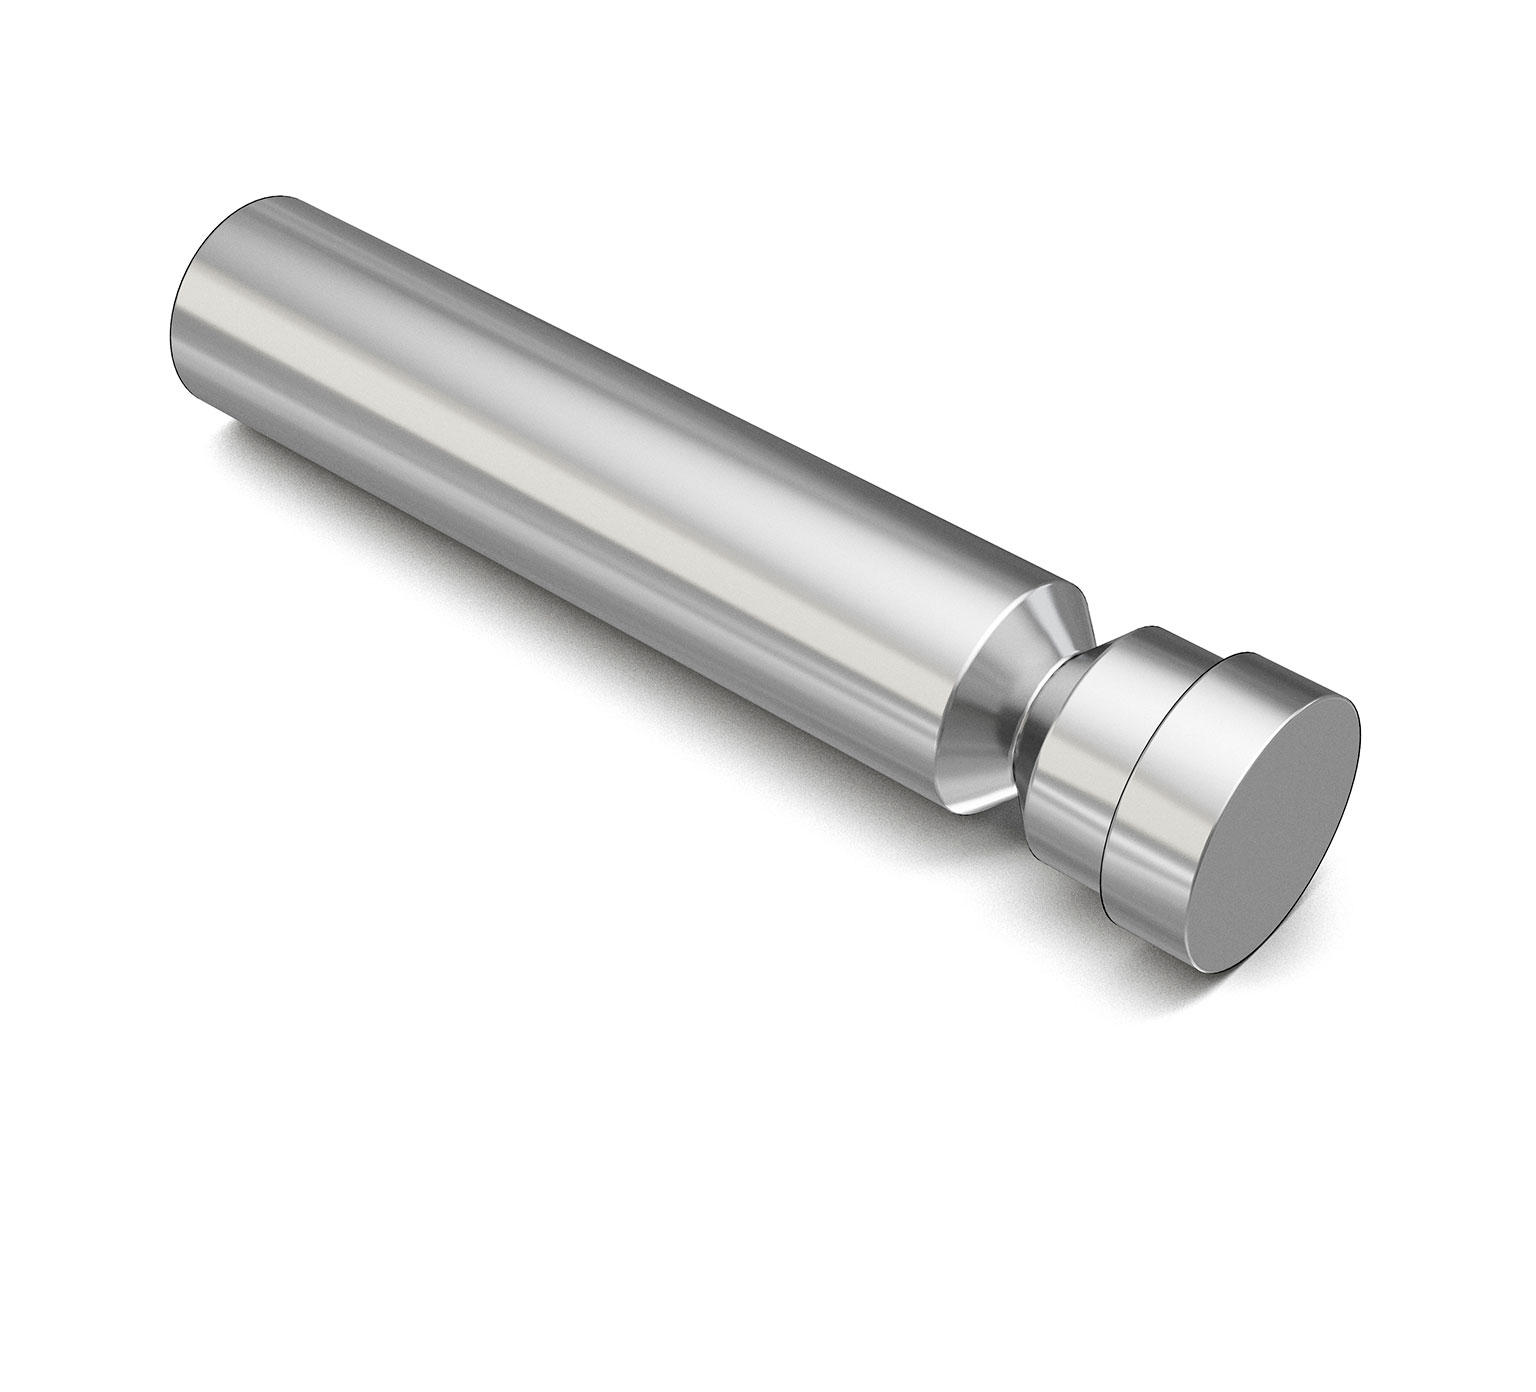 1037399 Stainless Steel Pin - 0.374 x 1.78 in alt 1